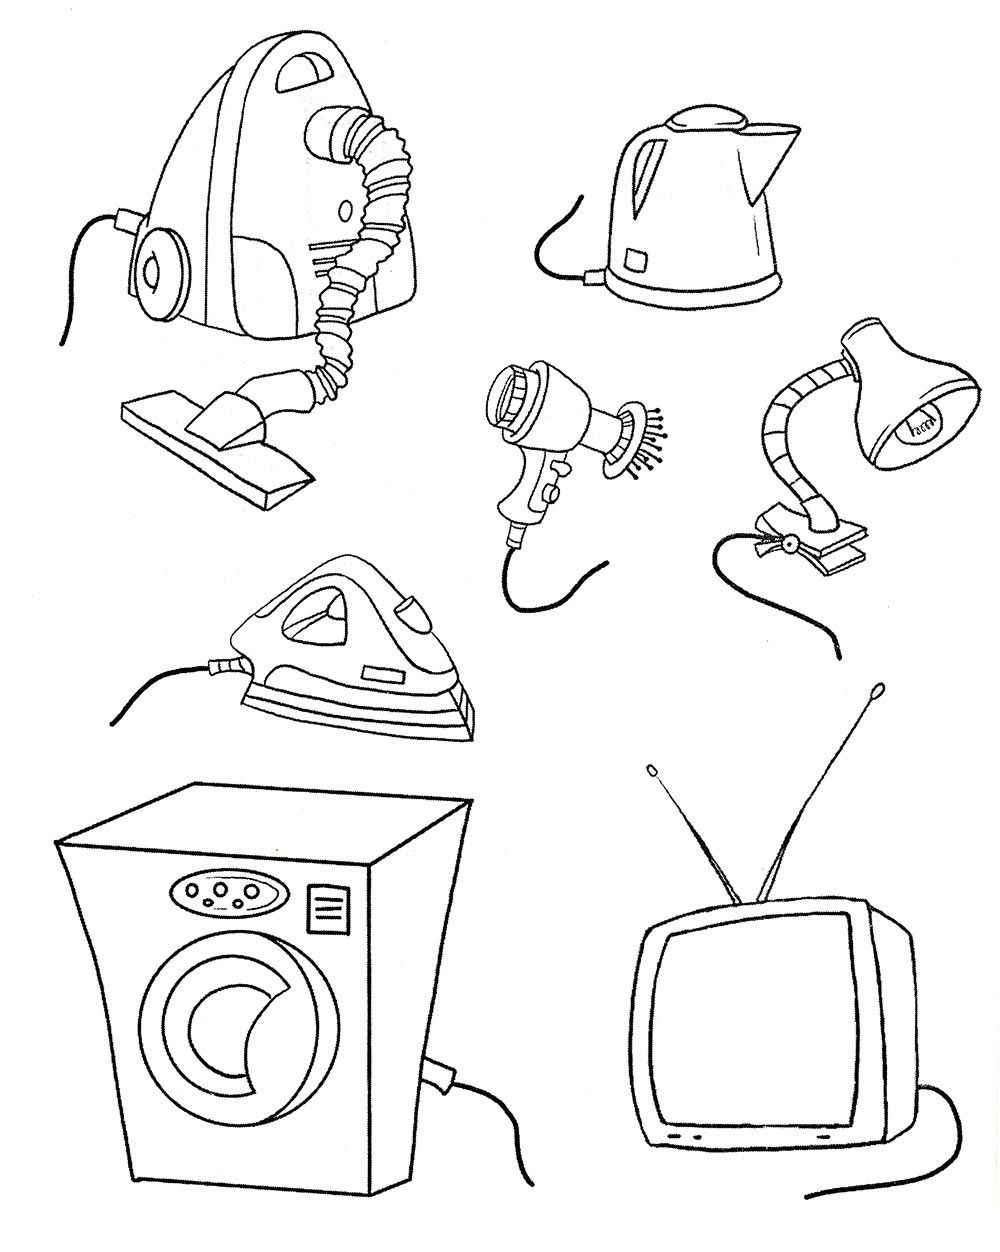 Electricity Coloring Pages For Kids